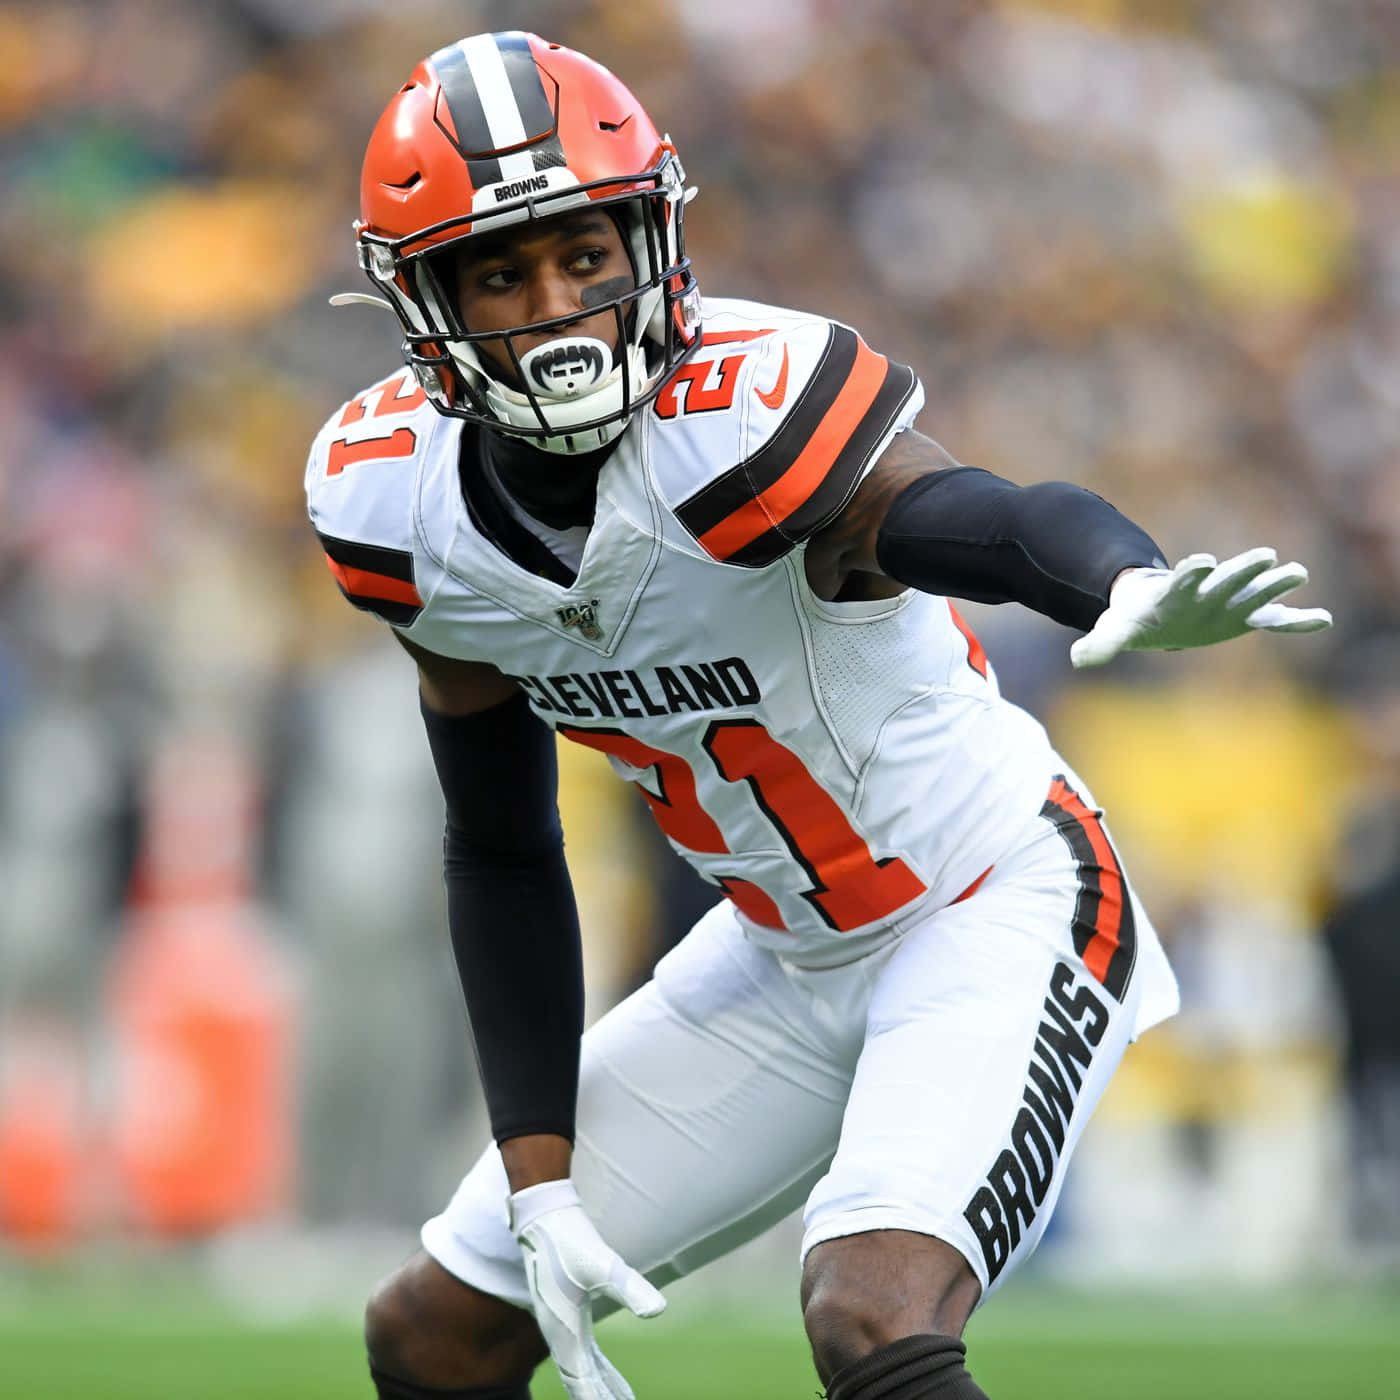 Denzelward Cleveland Browns Contro Pittsburgh Steelers Sfondo